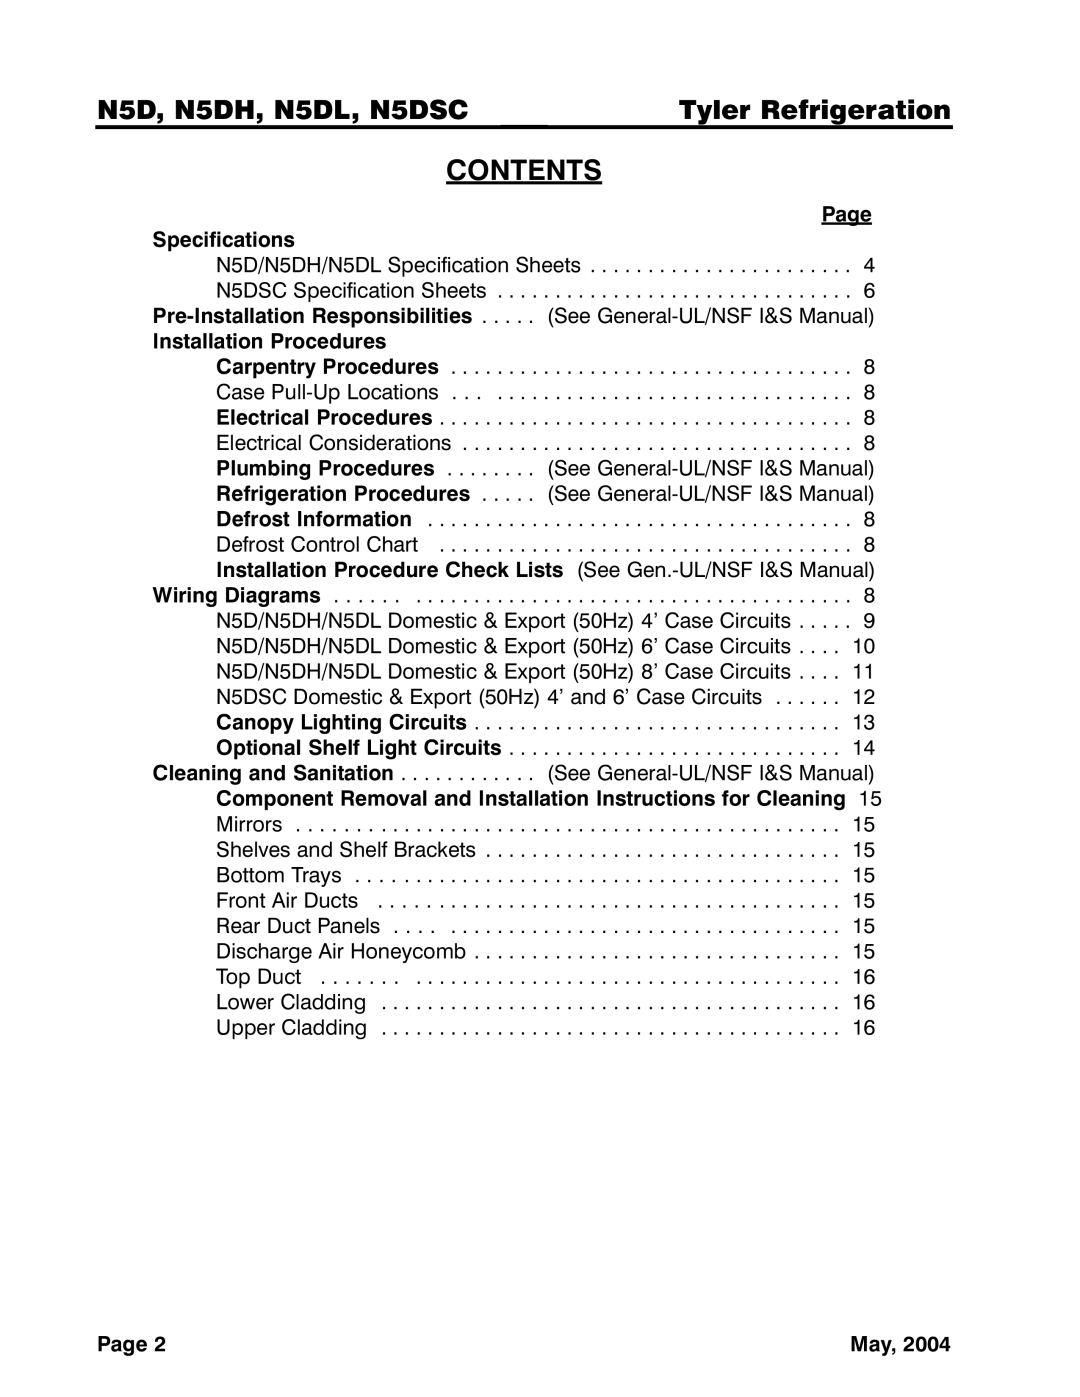 Tyler Refrigeration service manual Contents, N5D, N5DH, N5DL, N5DSCTyler Refrigeration 